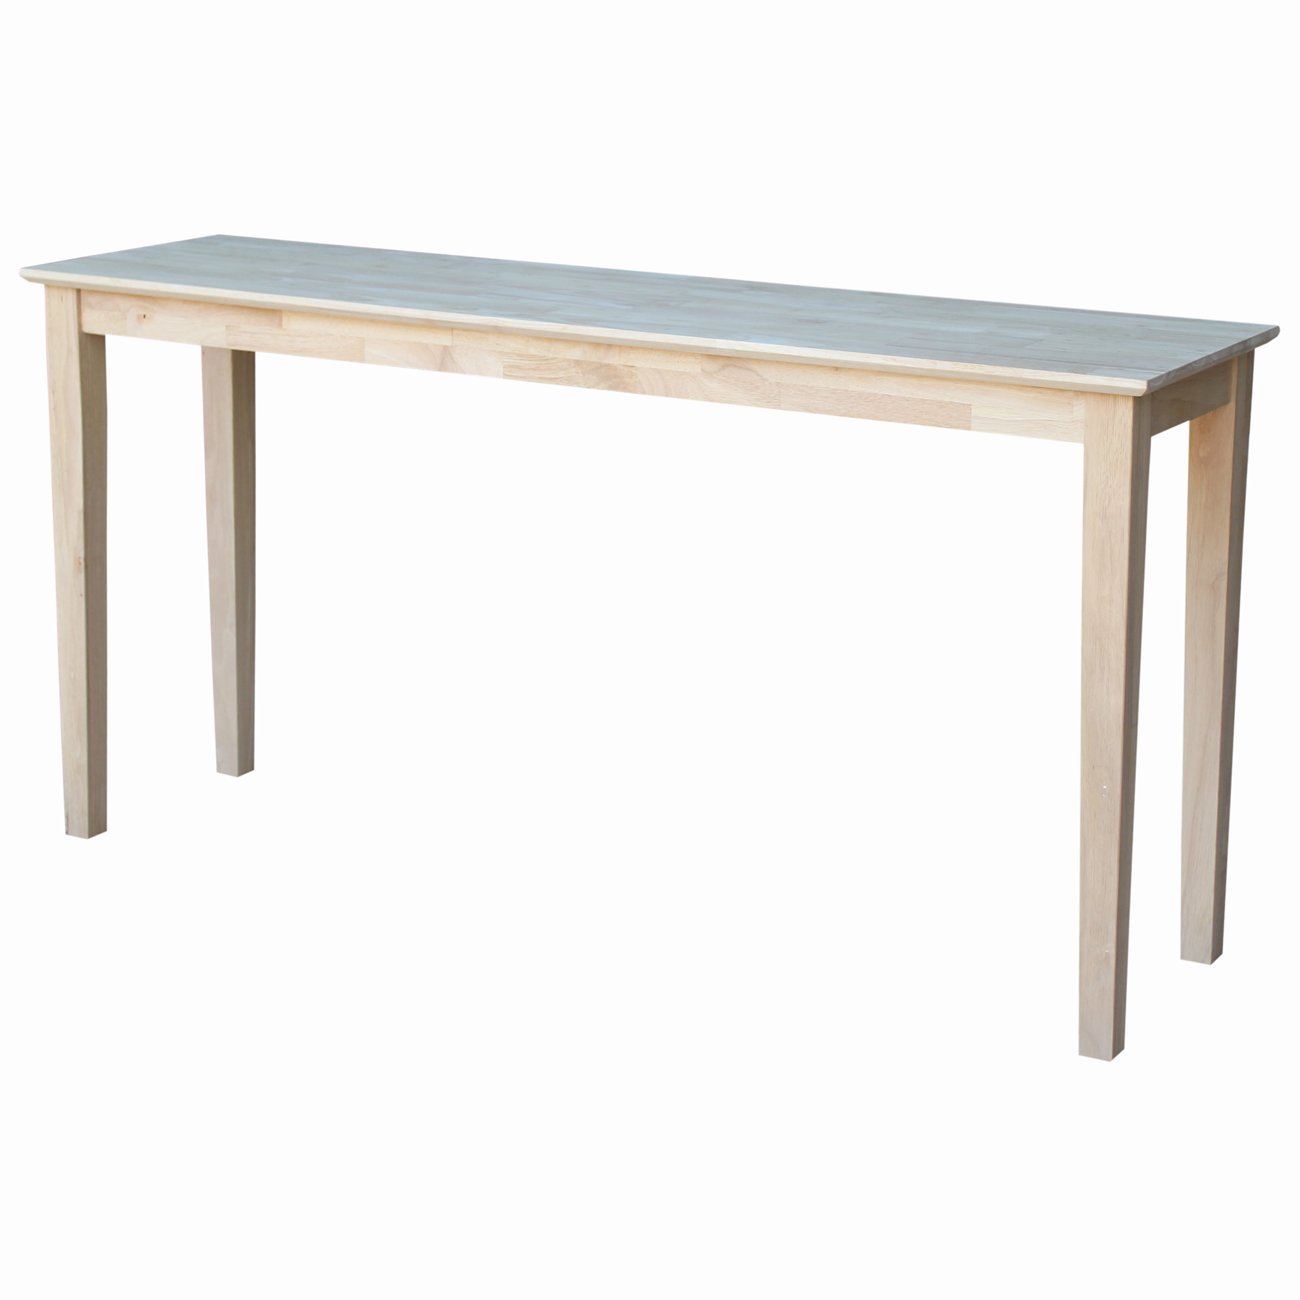 International Concepts Unfinished Shaker Extended Length Console Table